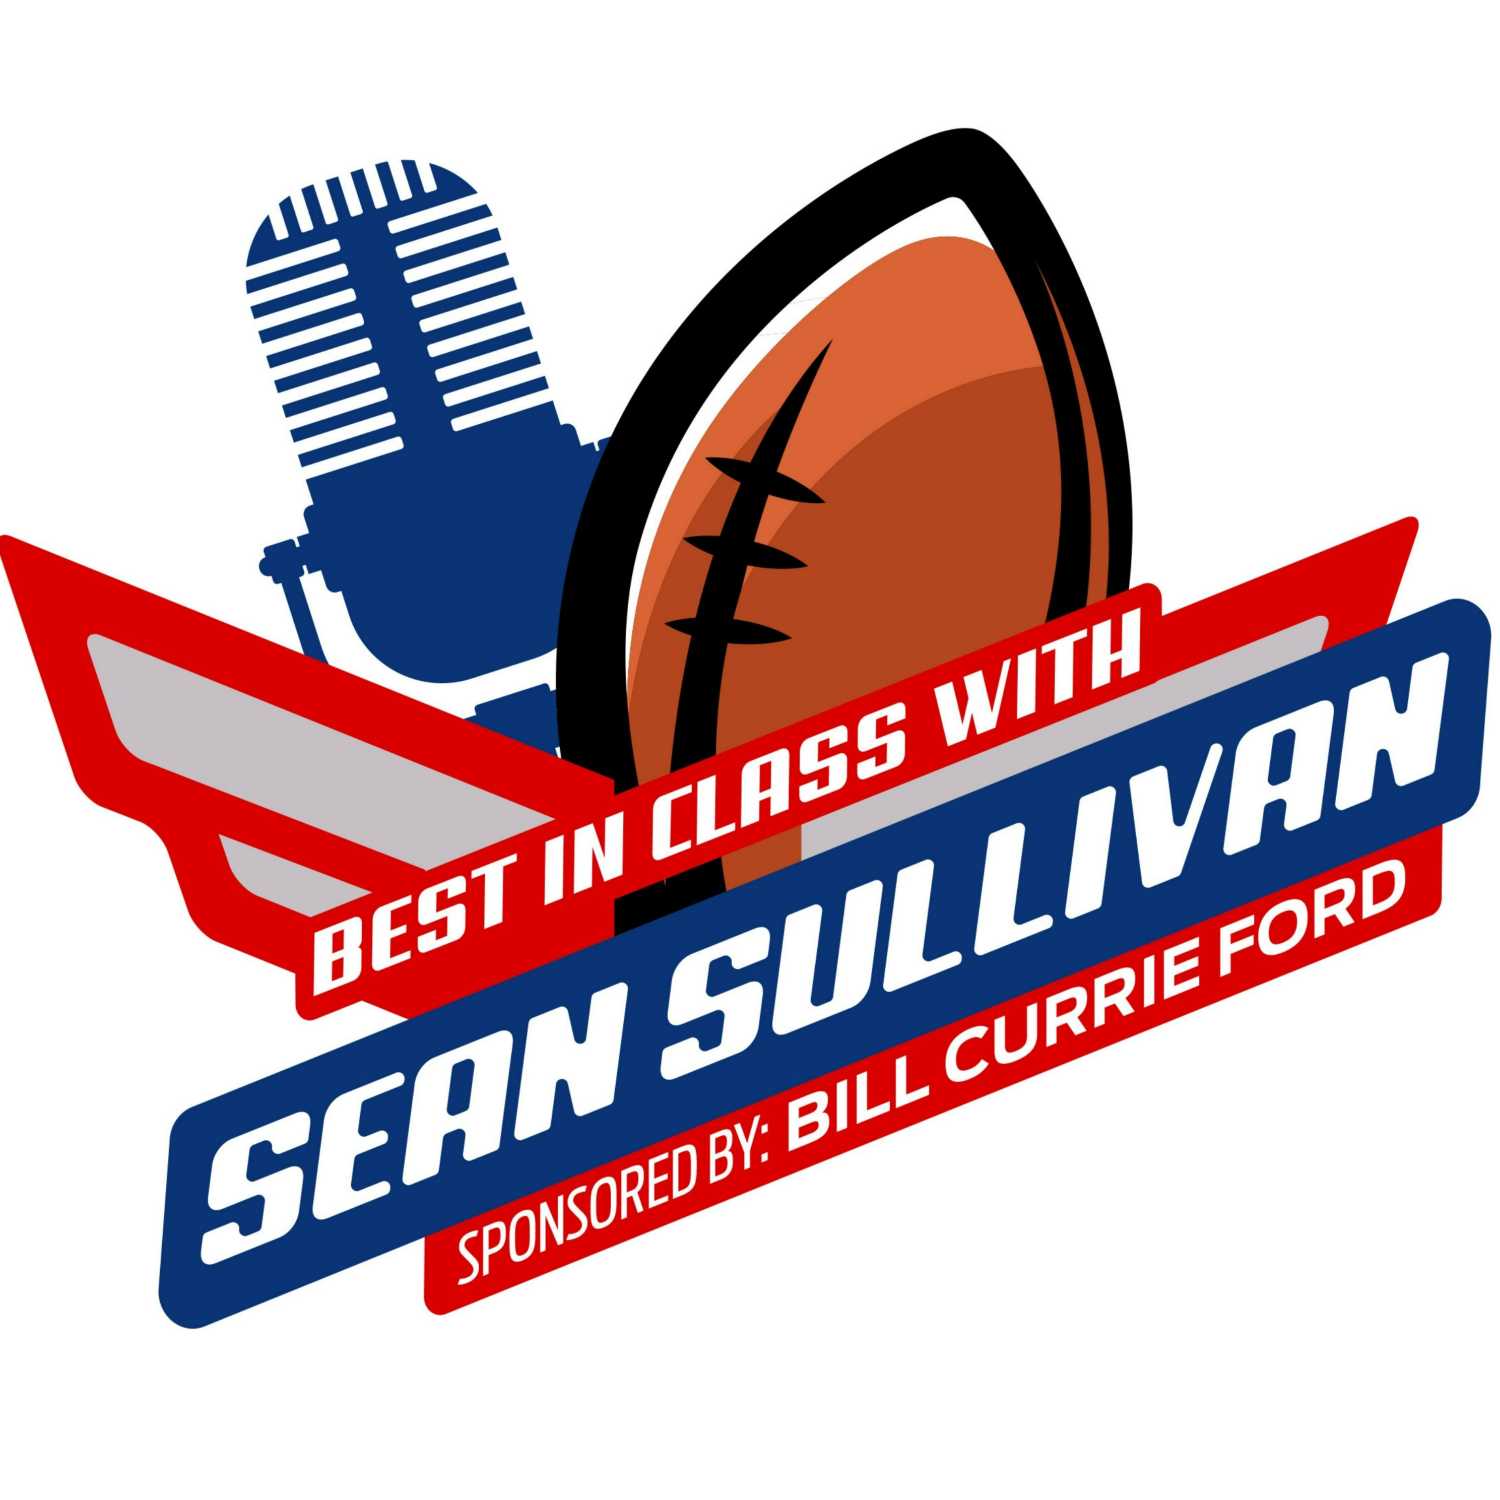 Best In Class: Episode 21: NFL Scouting Combine Notes & Unique Perspective On The Best In Class Podcast